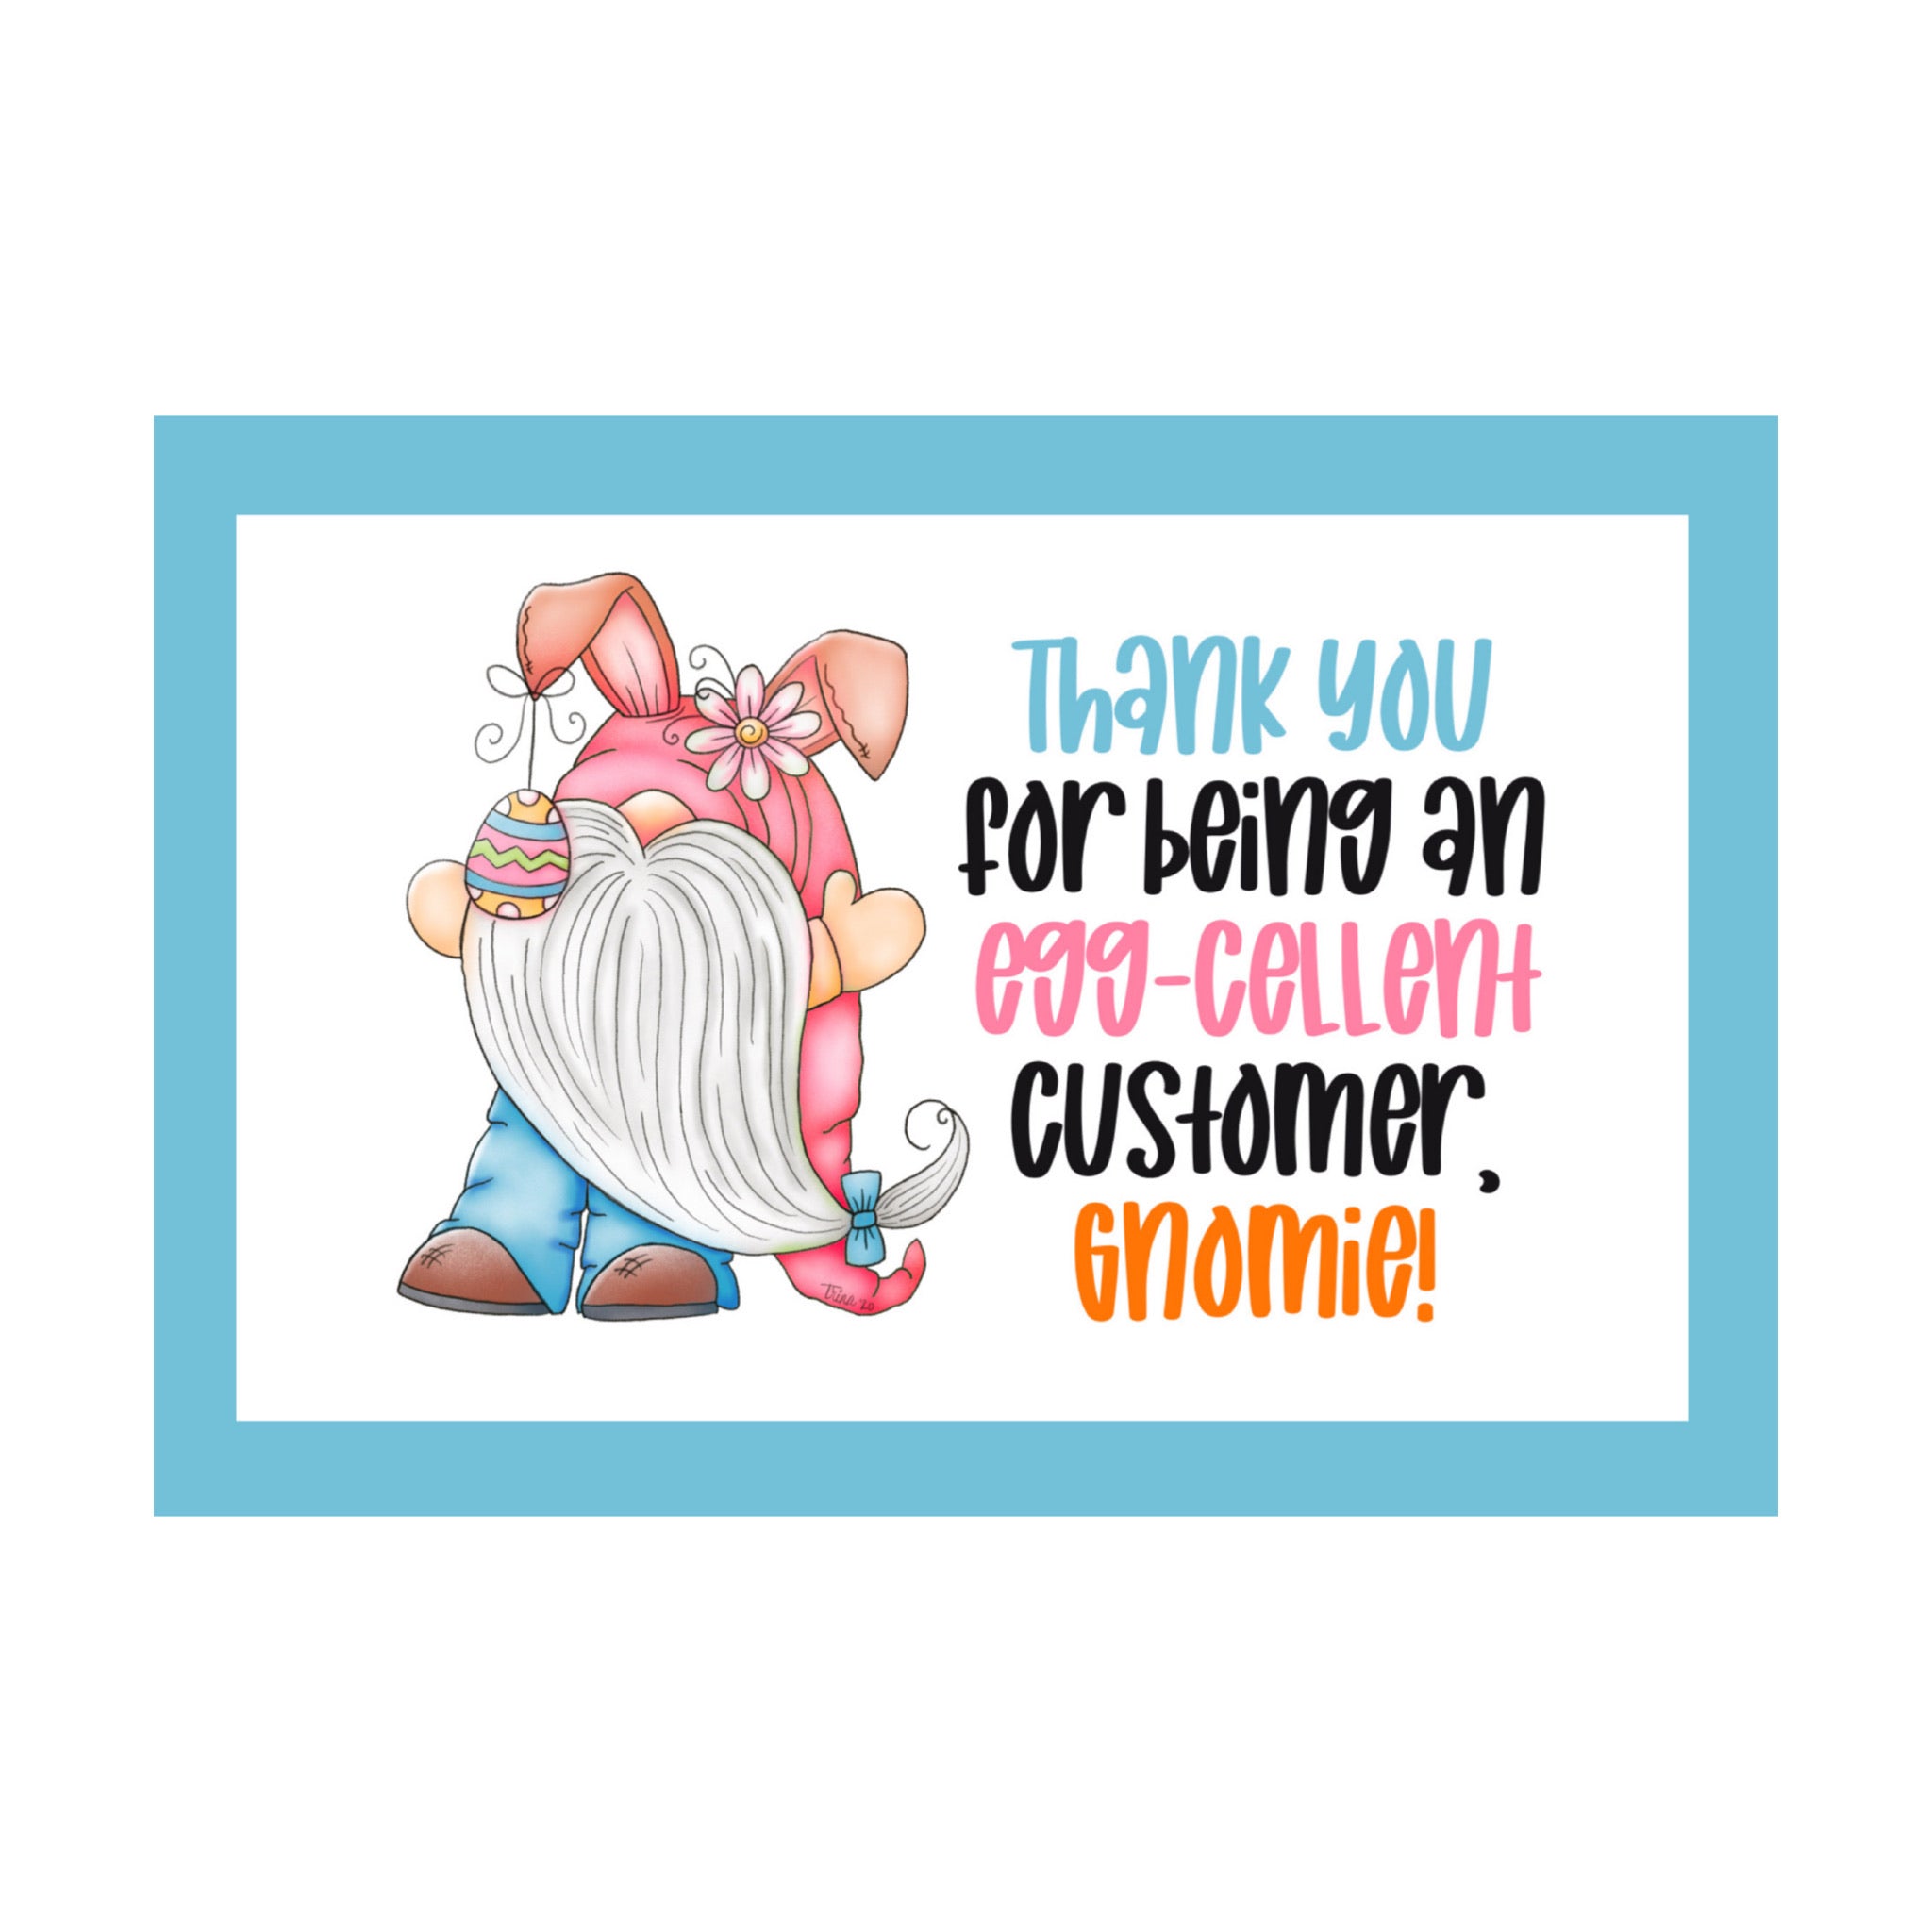 TGD Exclusive! Thank You for Being an EGG-cellent Customer, Gnomie Gnome Sticker 1.5x2.5 Square Stickers, 25 stickers per pack